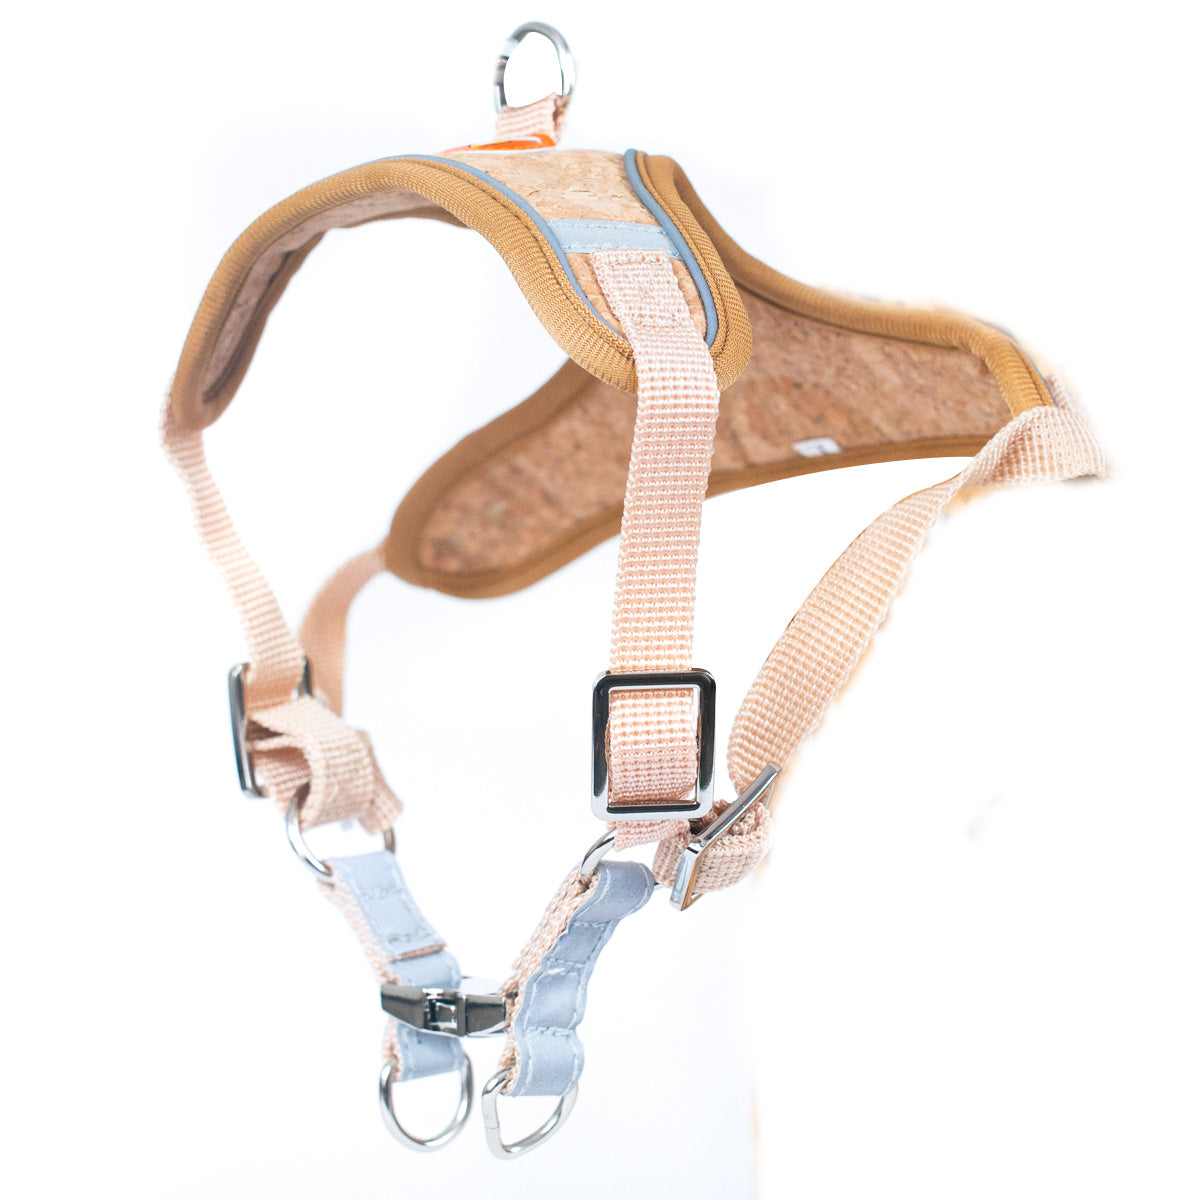 Cork Dog Harness & Leash Set for Small Dogs - Comfortable Vest for Chihuahua, Beagle & Puppies | THE CORK COLLECTION